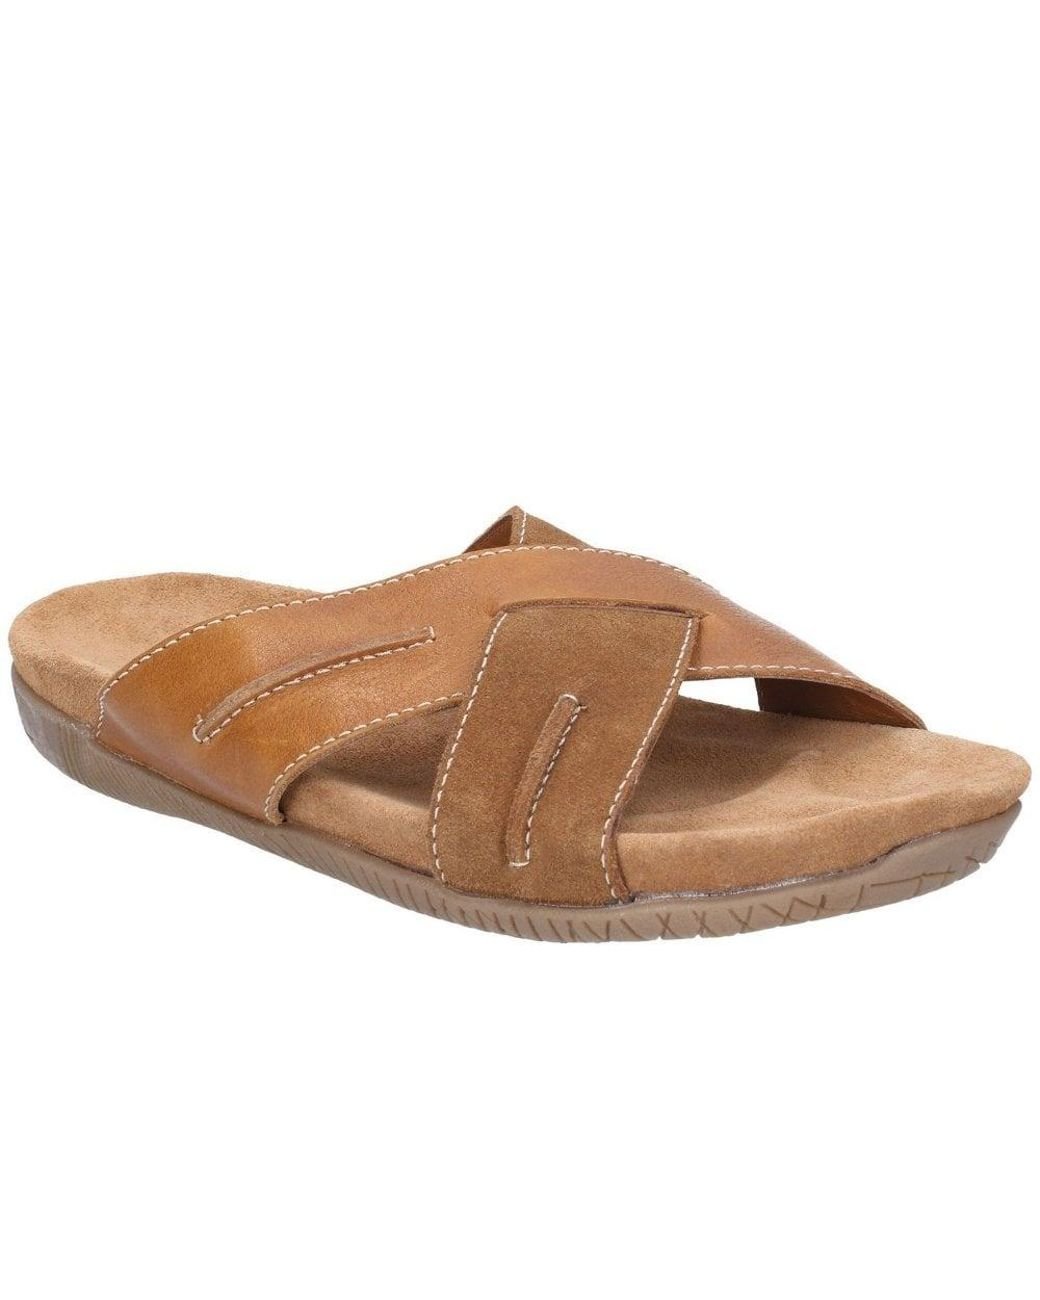 Hush Puppies Switch Mens Slip On Leather Mule Sandals Shoes Men's Shoes umoonproductions.com